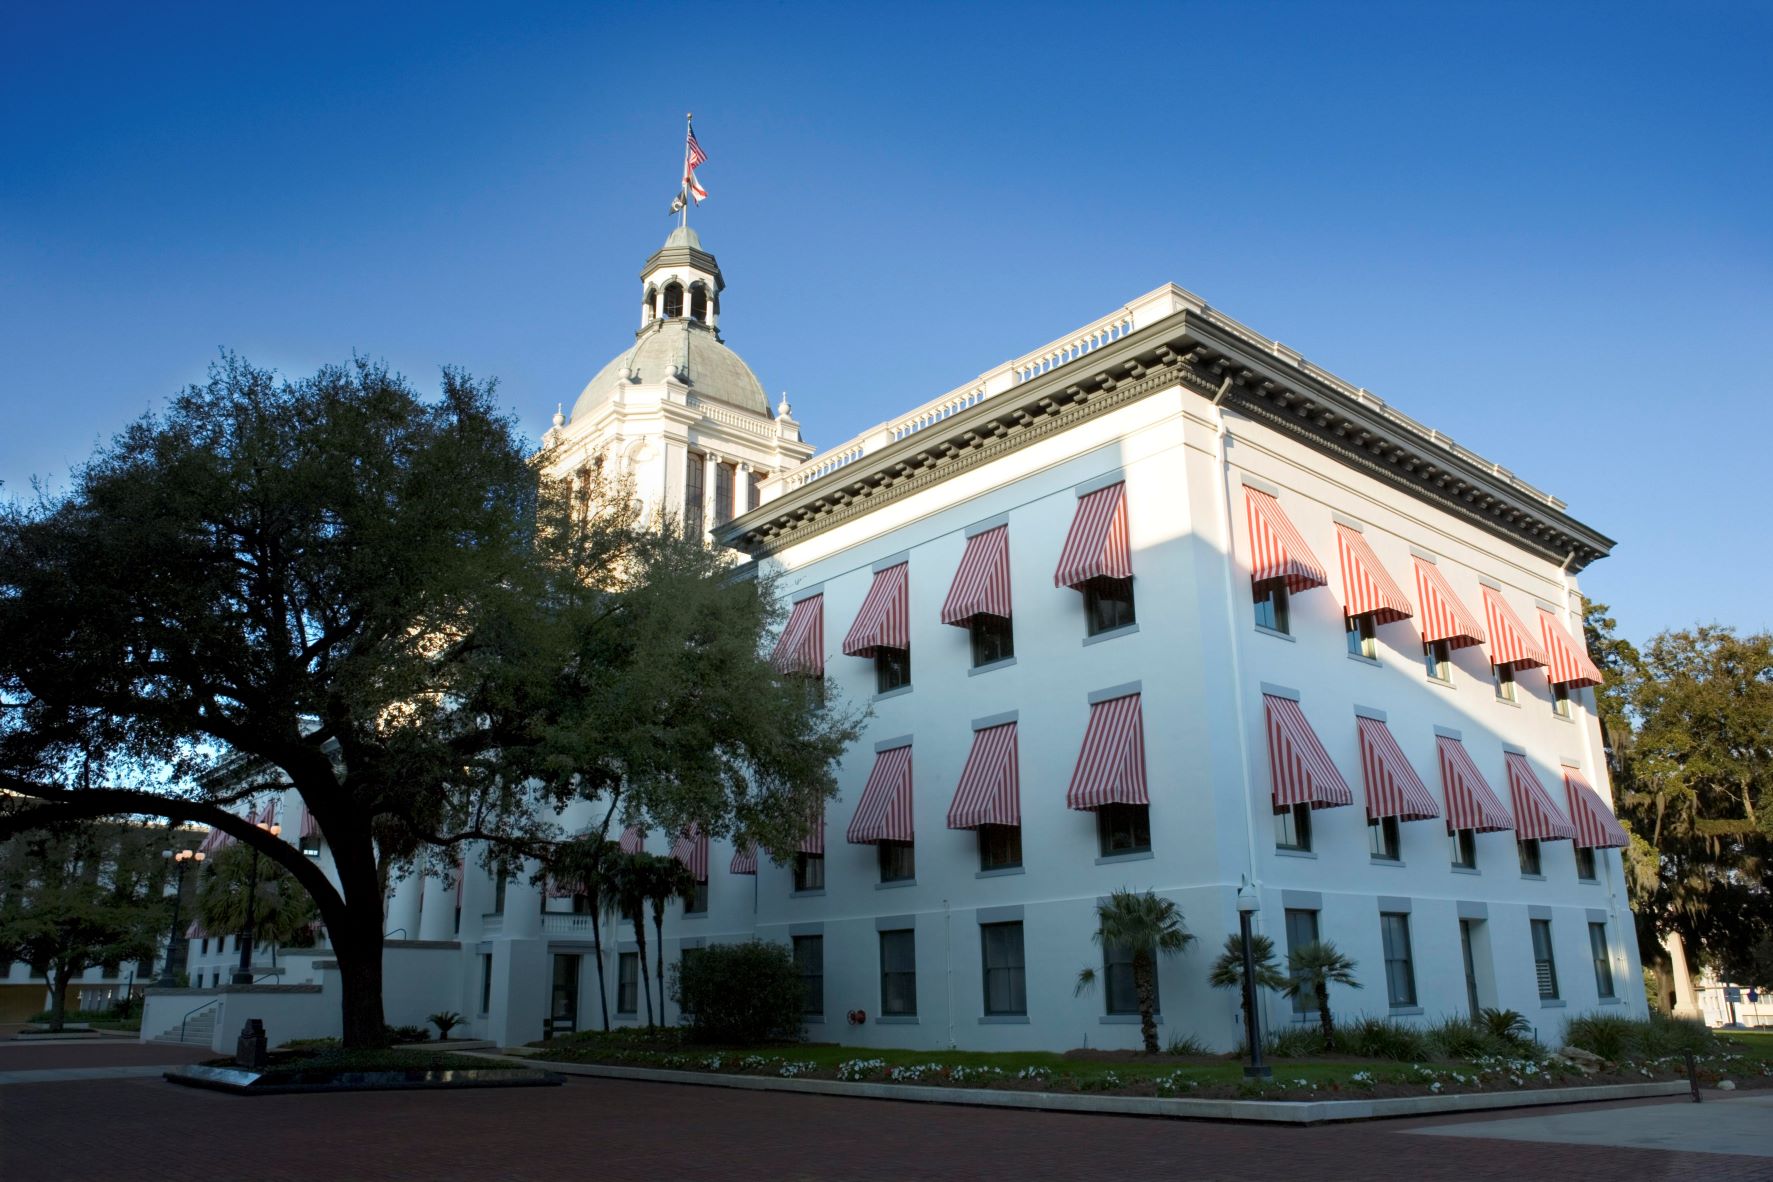 State capitol building, Tallahassee